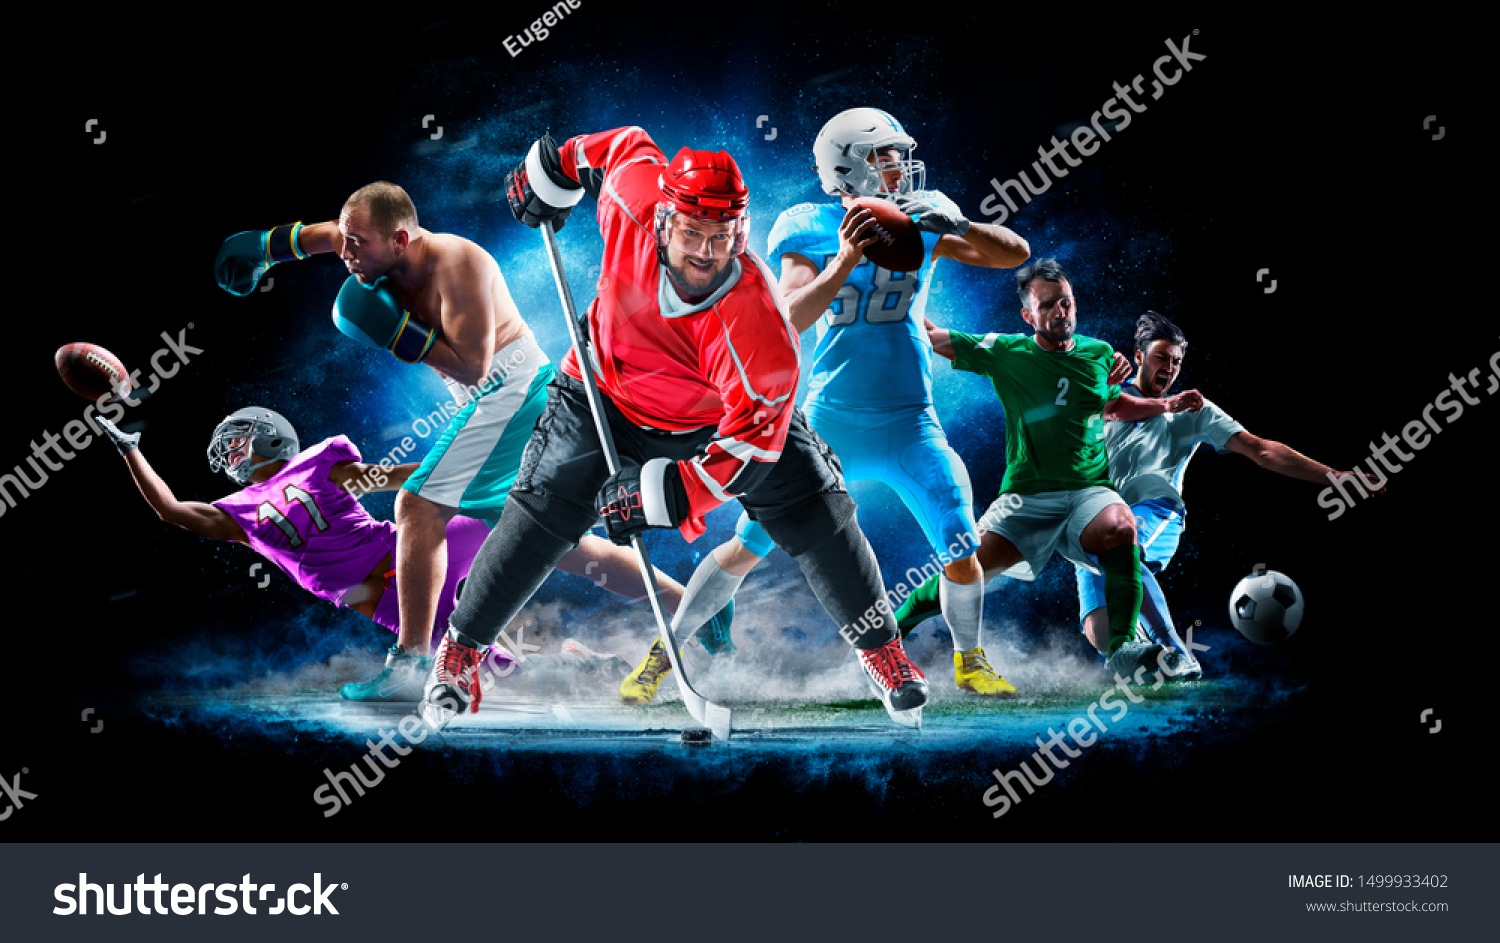 Multi sport collage football boxing soccer ice hockey on black background #1499933402